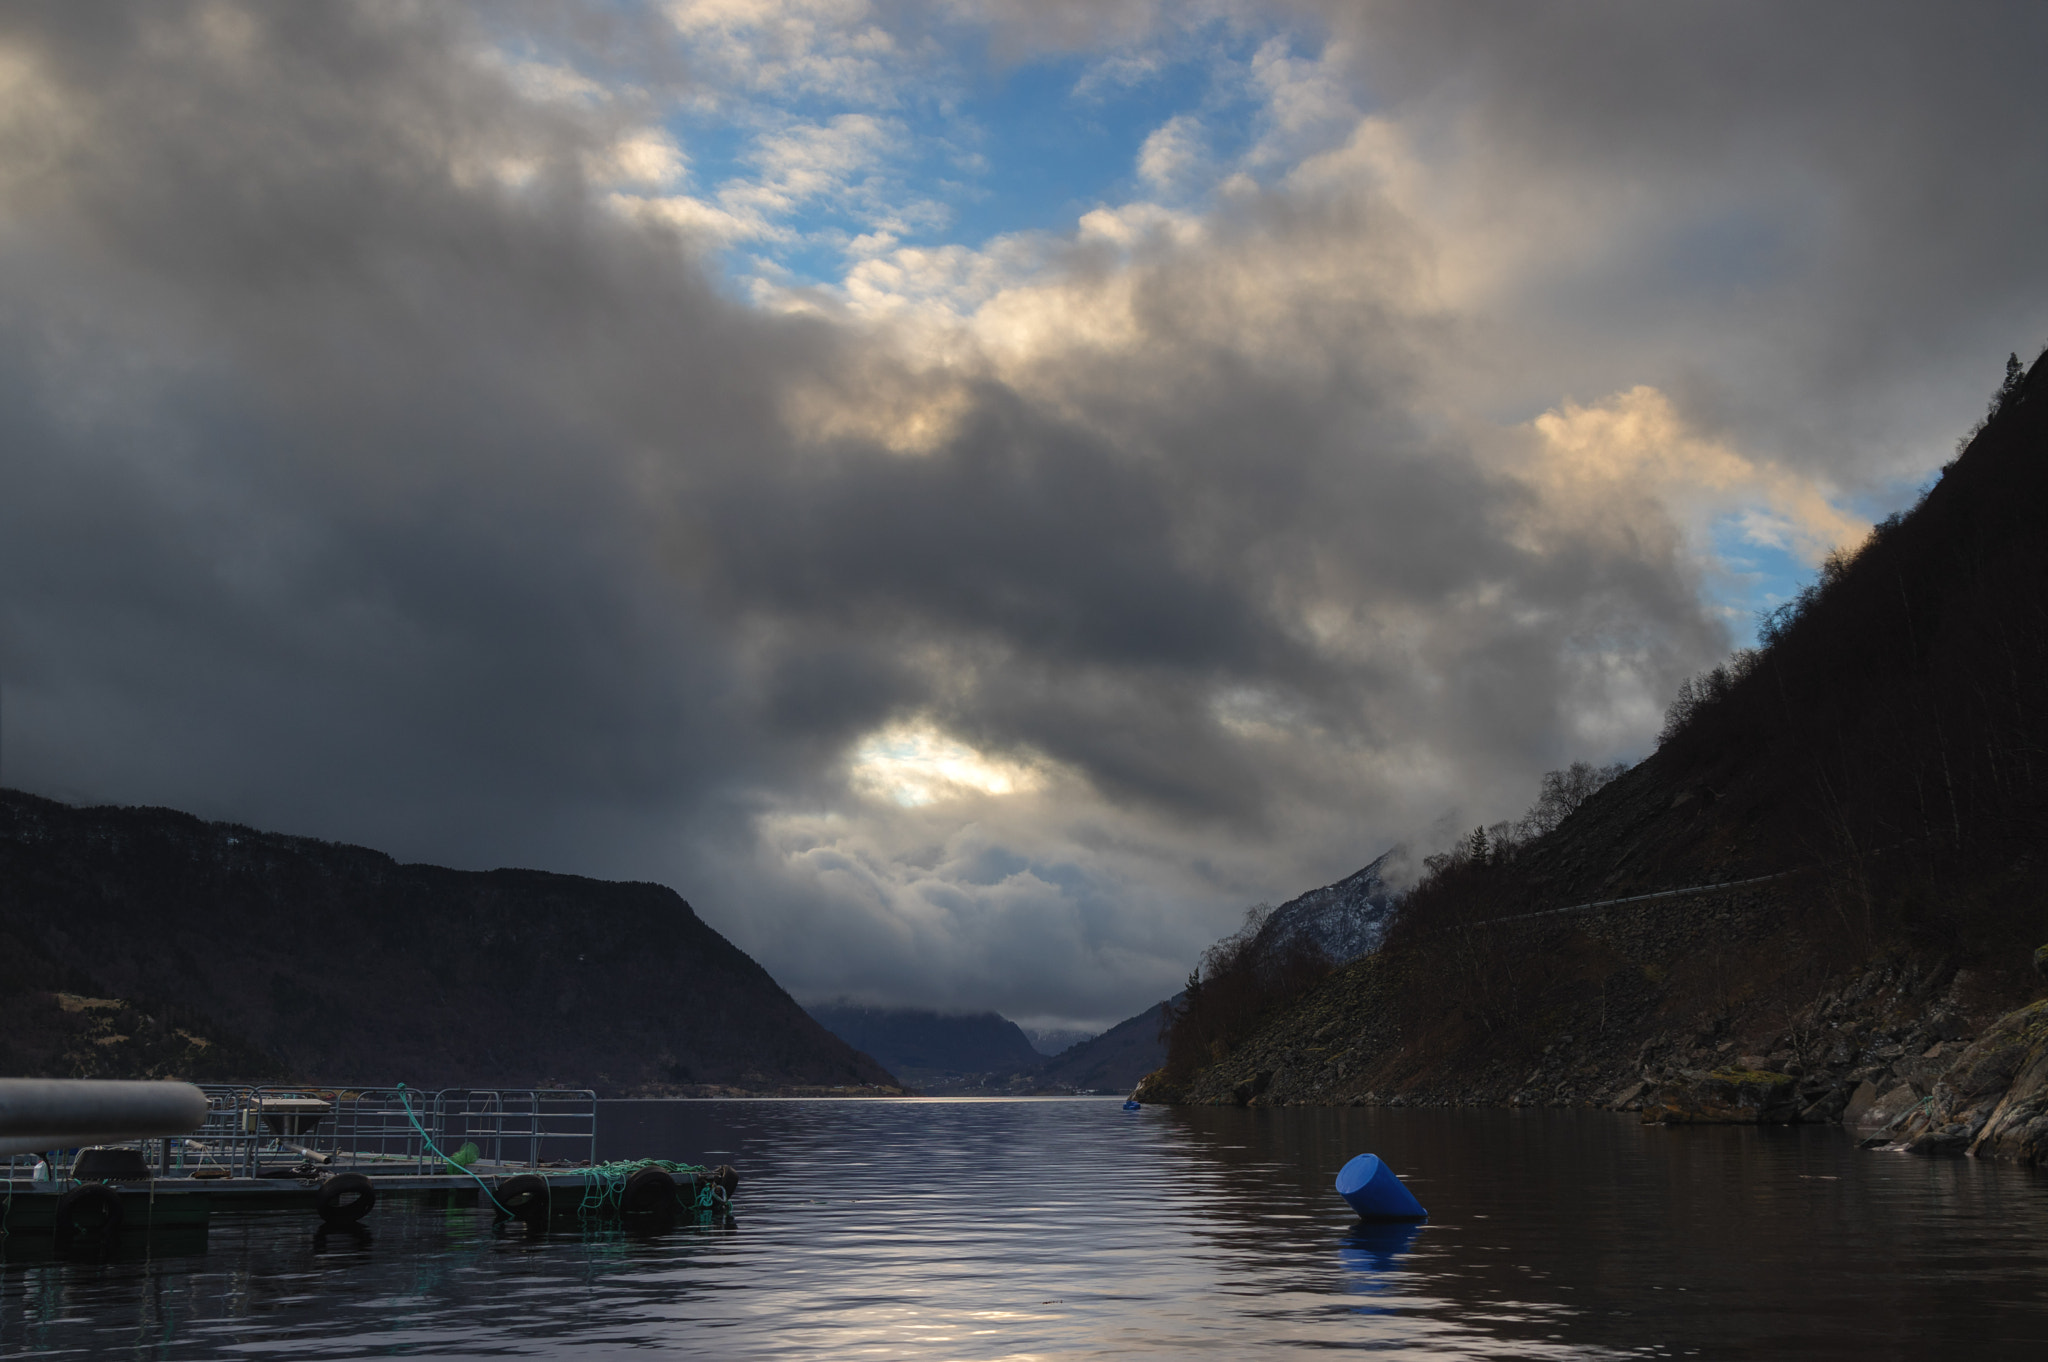 Pentax K-3 II sample photo. The fjord photography